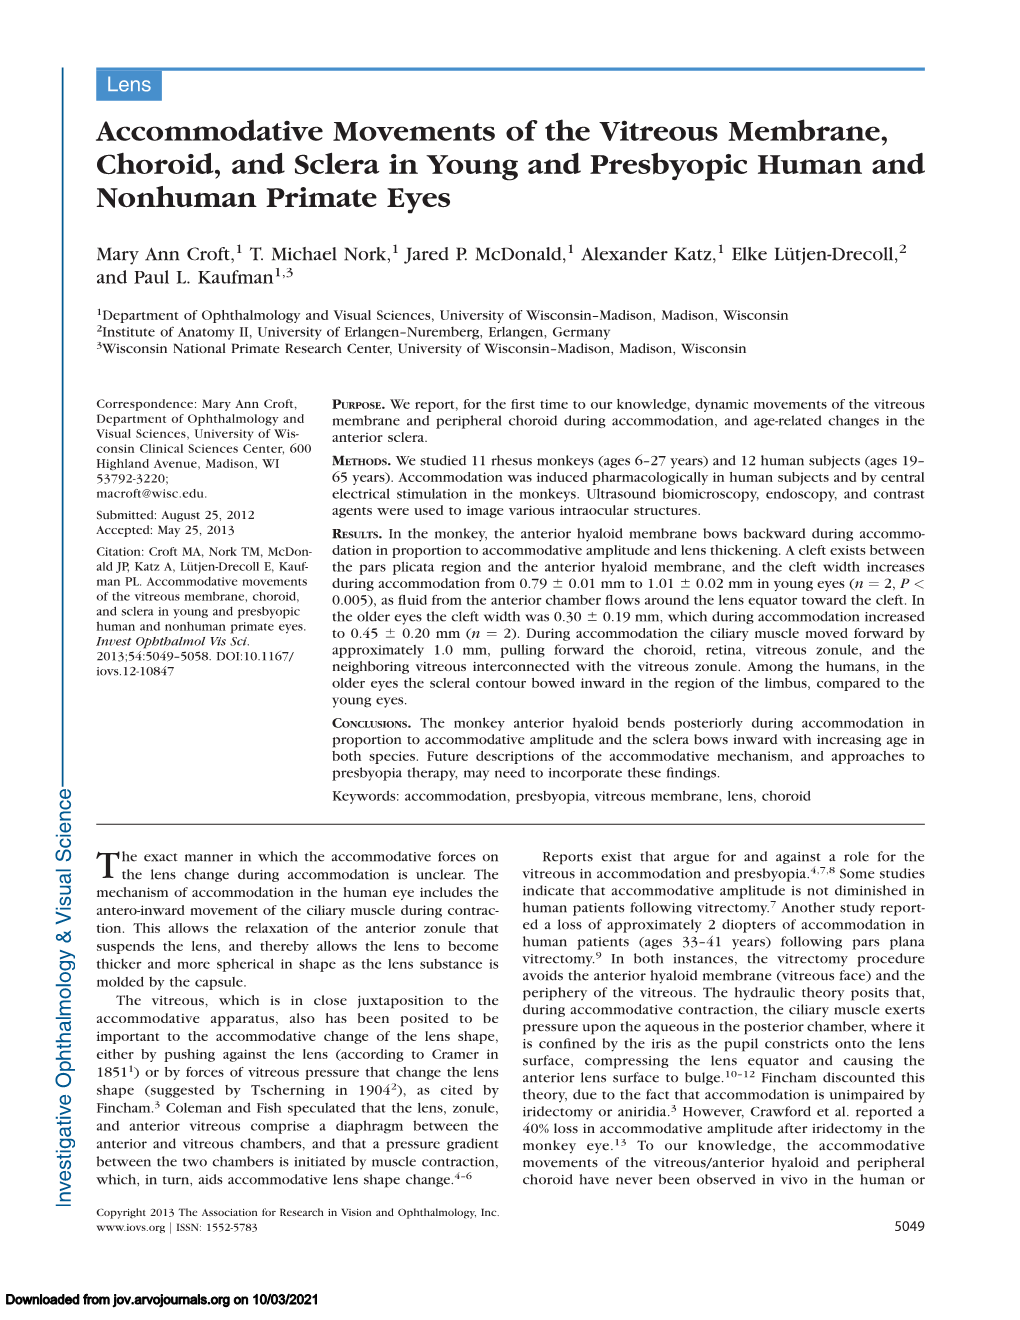 Accommodative Movements of the Vitreous Membrane, Choroid, and Sclera in Young and Presbyopic Human and Nonhuman Primate Eyes